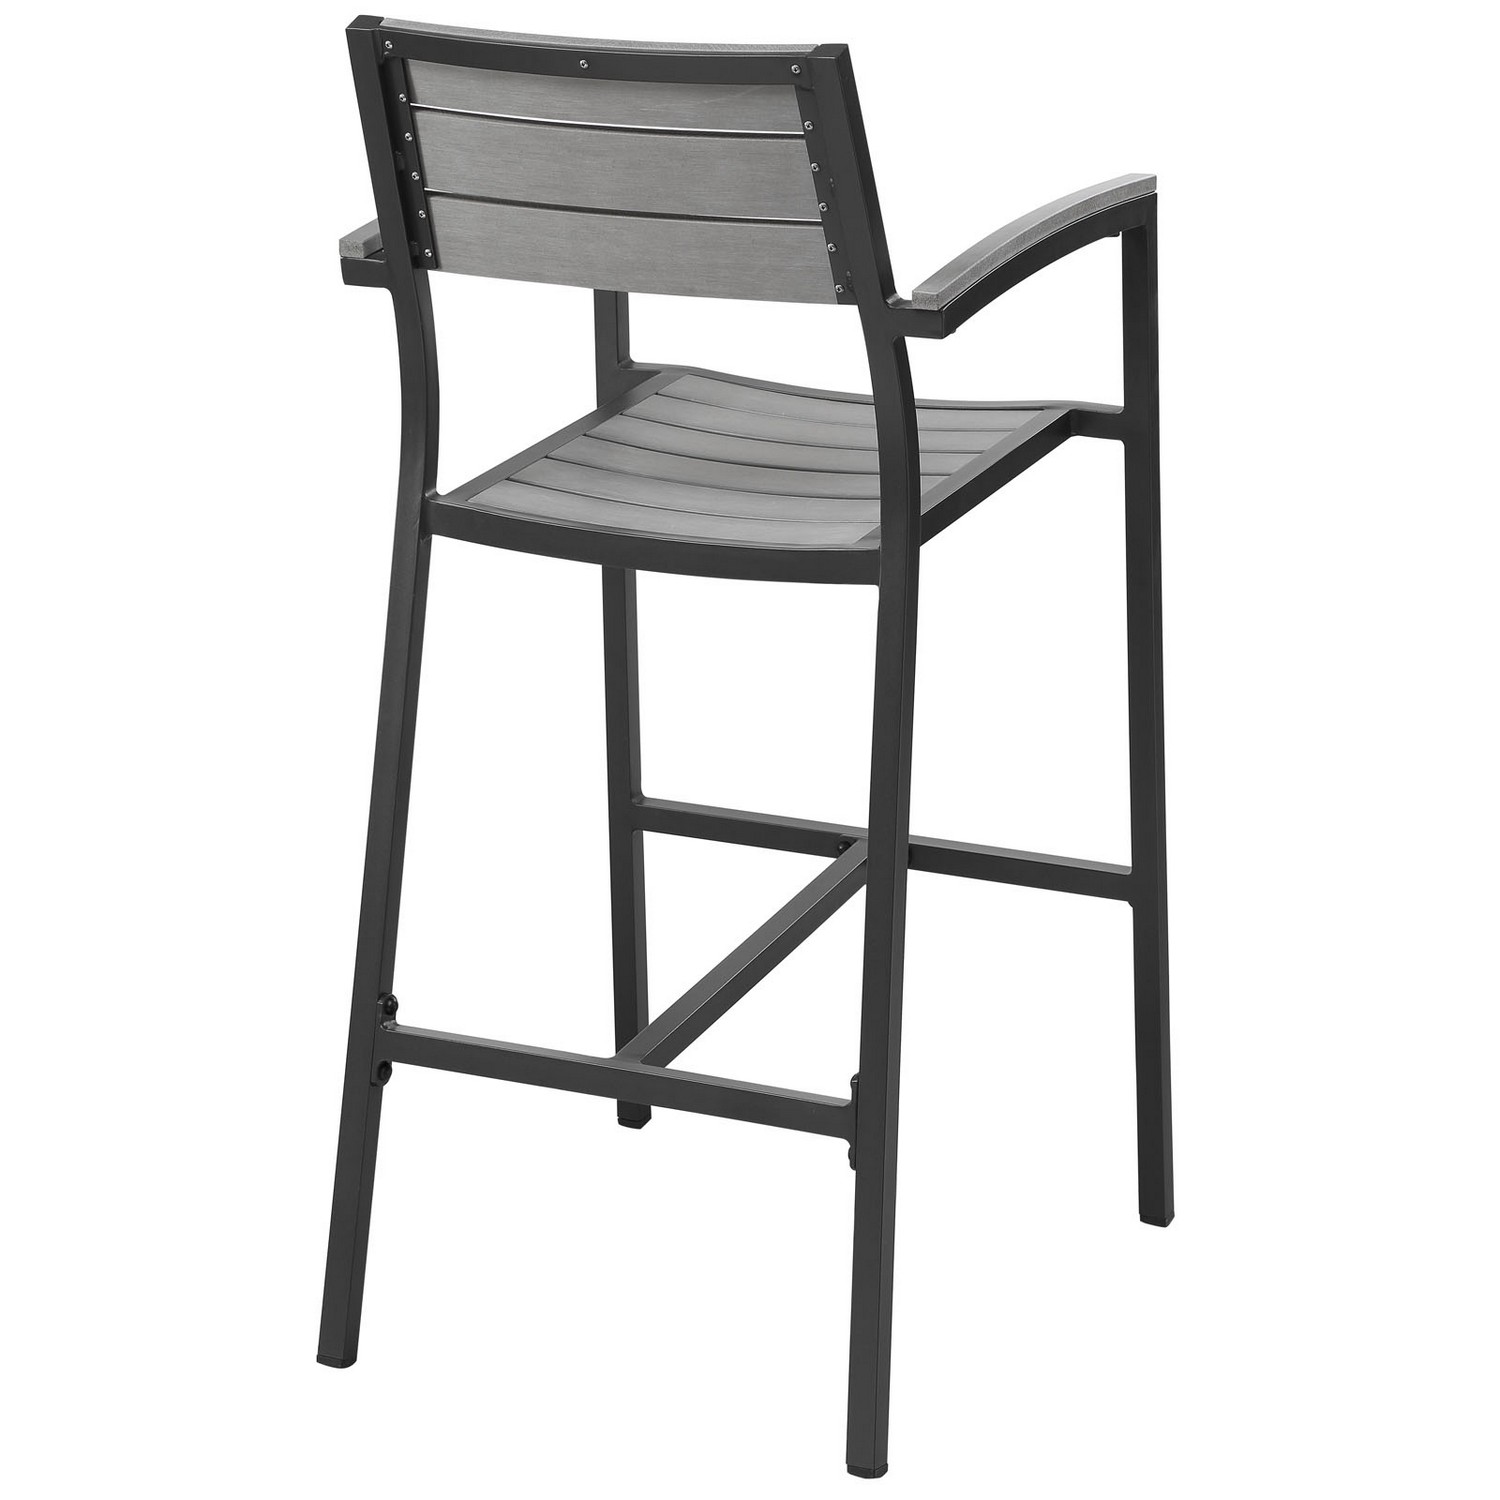 Modway Maine Bar Stool Outdoor Patio Set of 2 - Brown/Gray